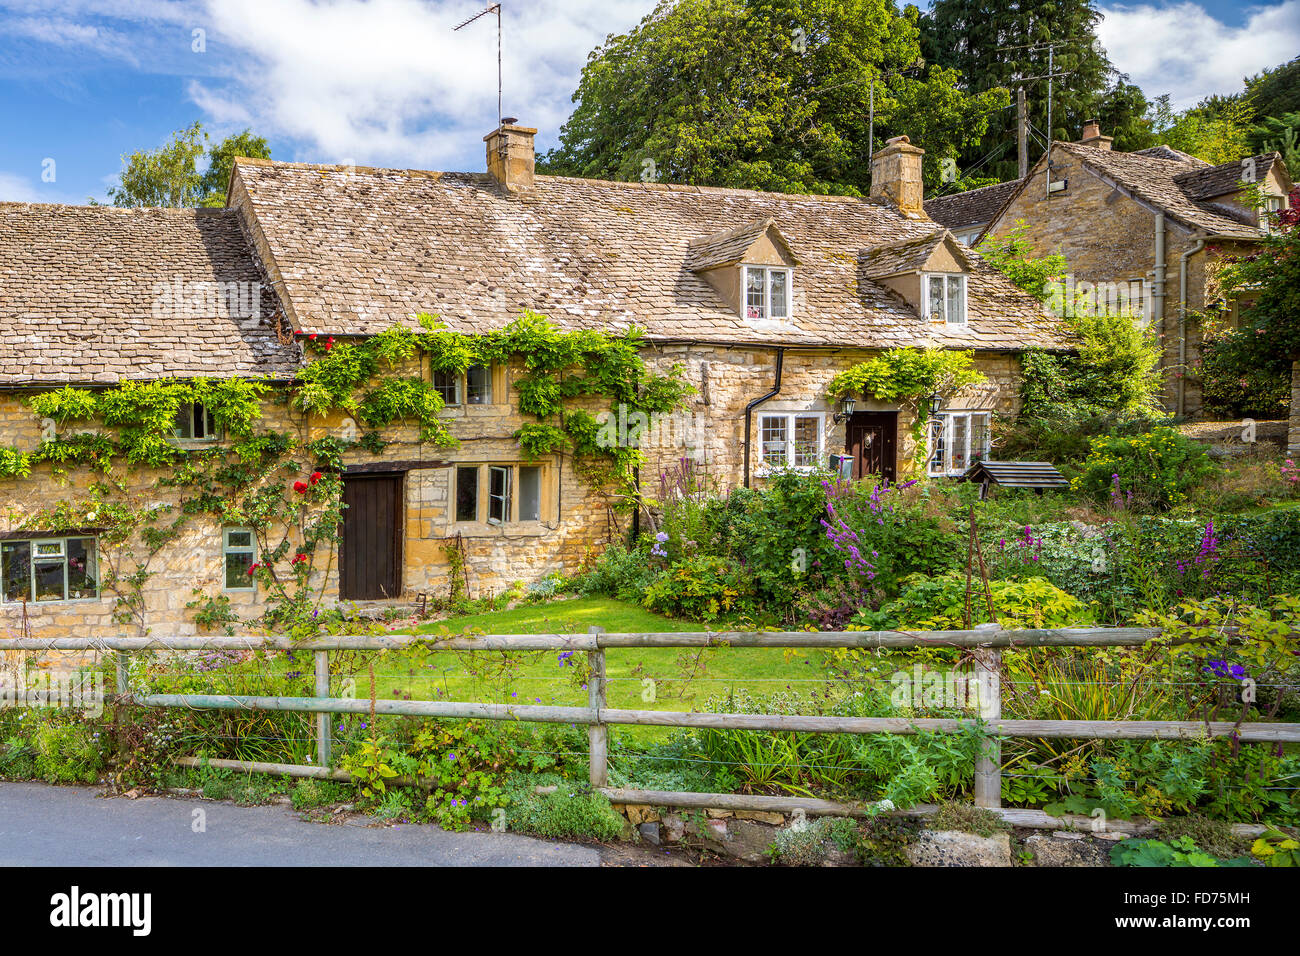 Snowshill village, Cotswolds, Gloucestershire, Angleterre, Royaume-Uni, Europe. Banque D'Images